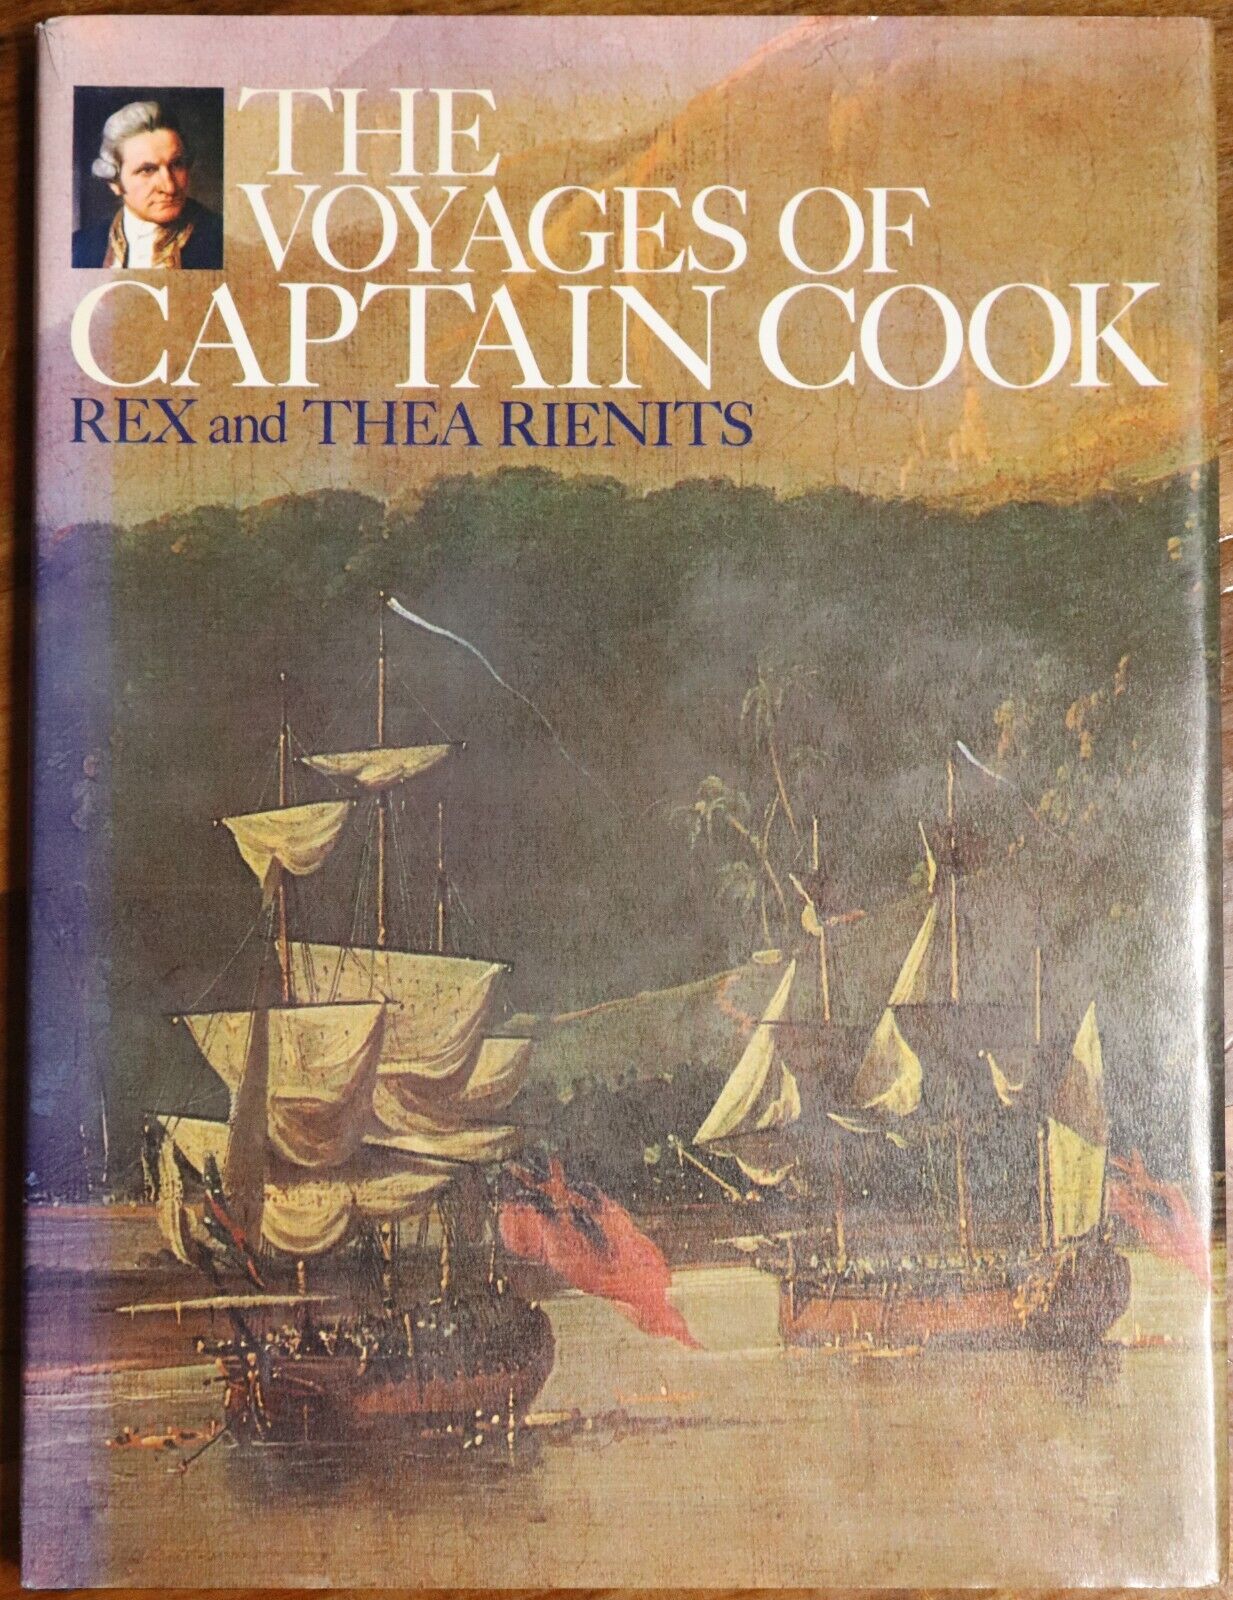 The Voyages Of Captain Cook - 1970 - Australian Discovery History Book